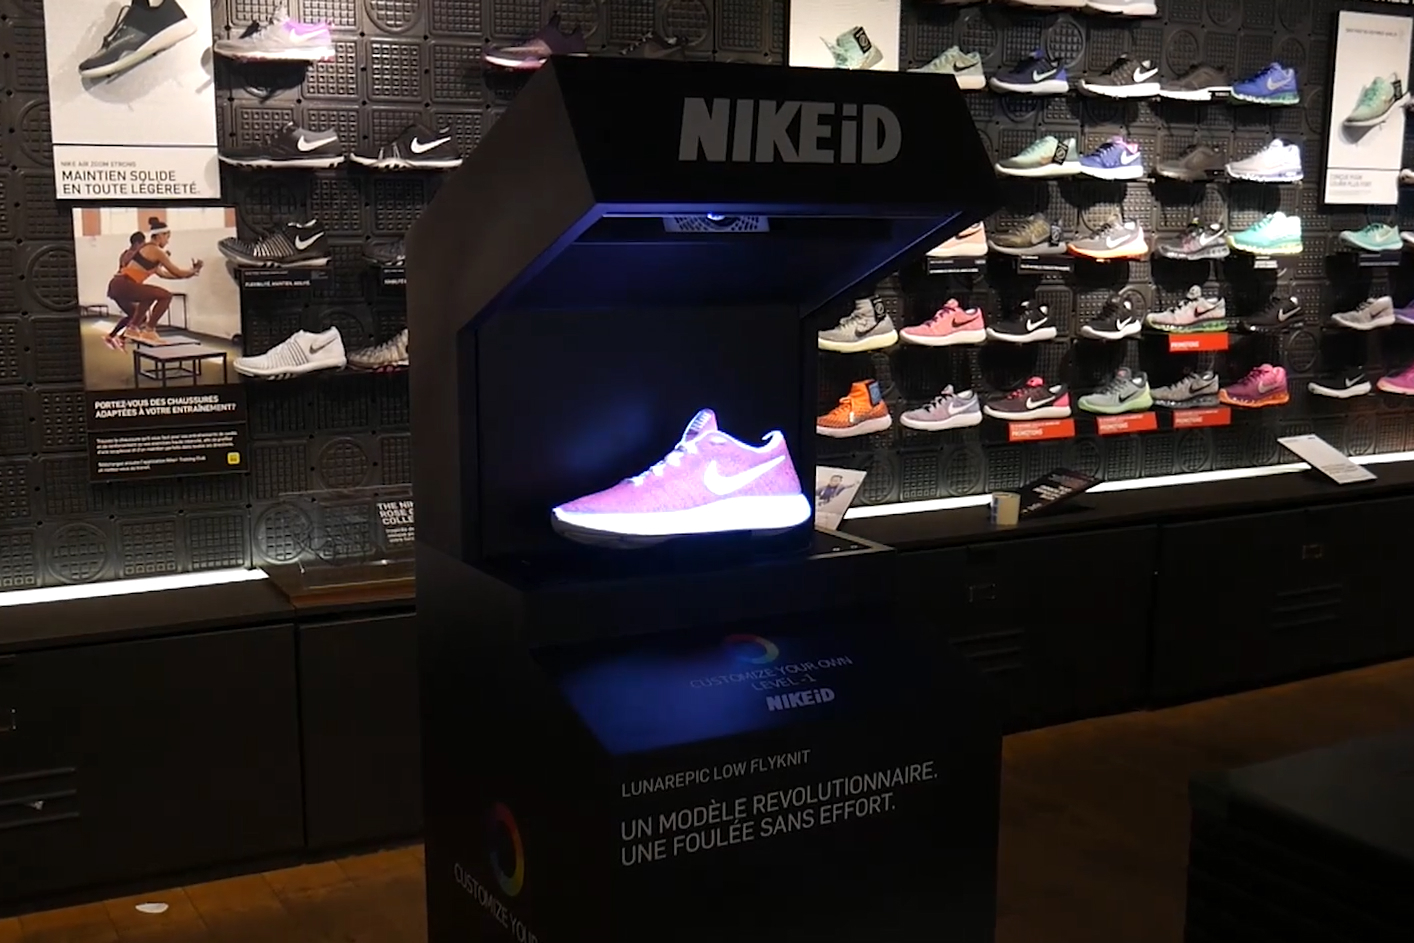 Nike Store Lets You Use Augmented To Test Sneaker Colors | Digital